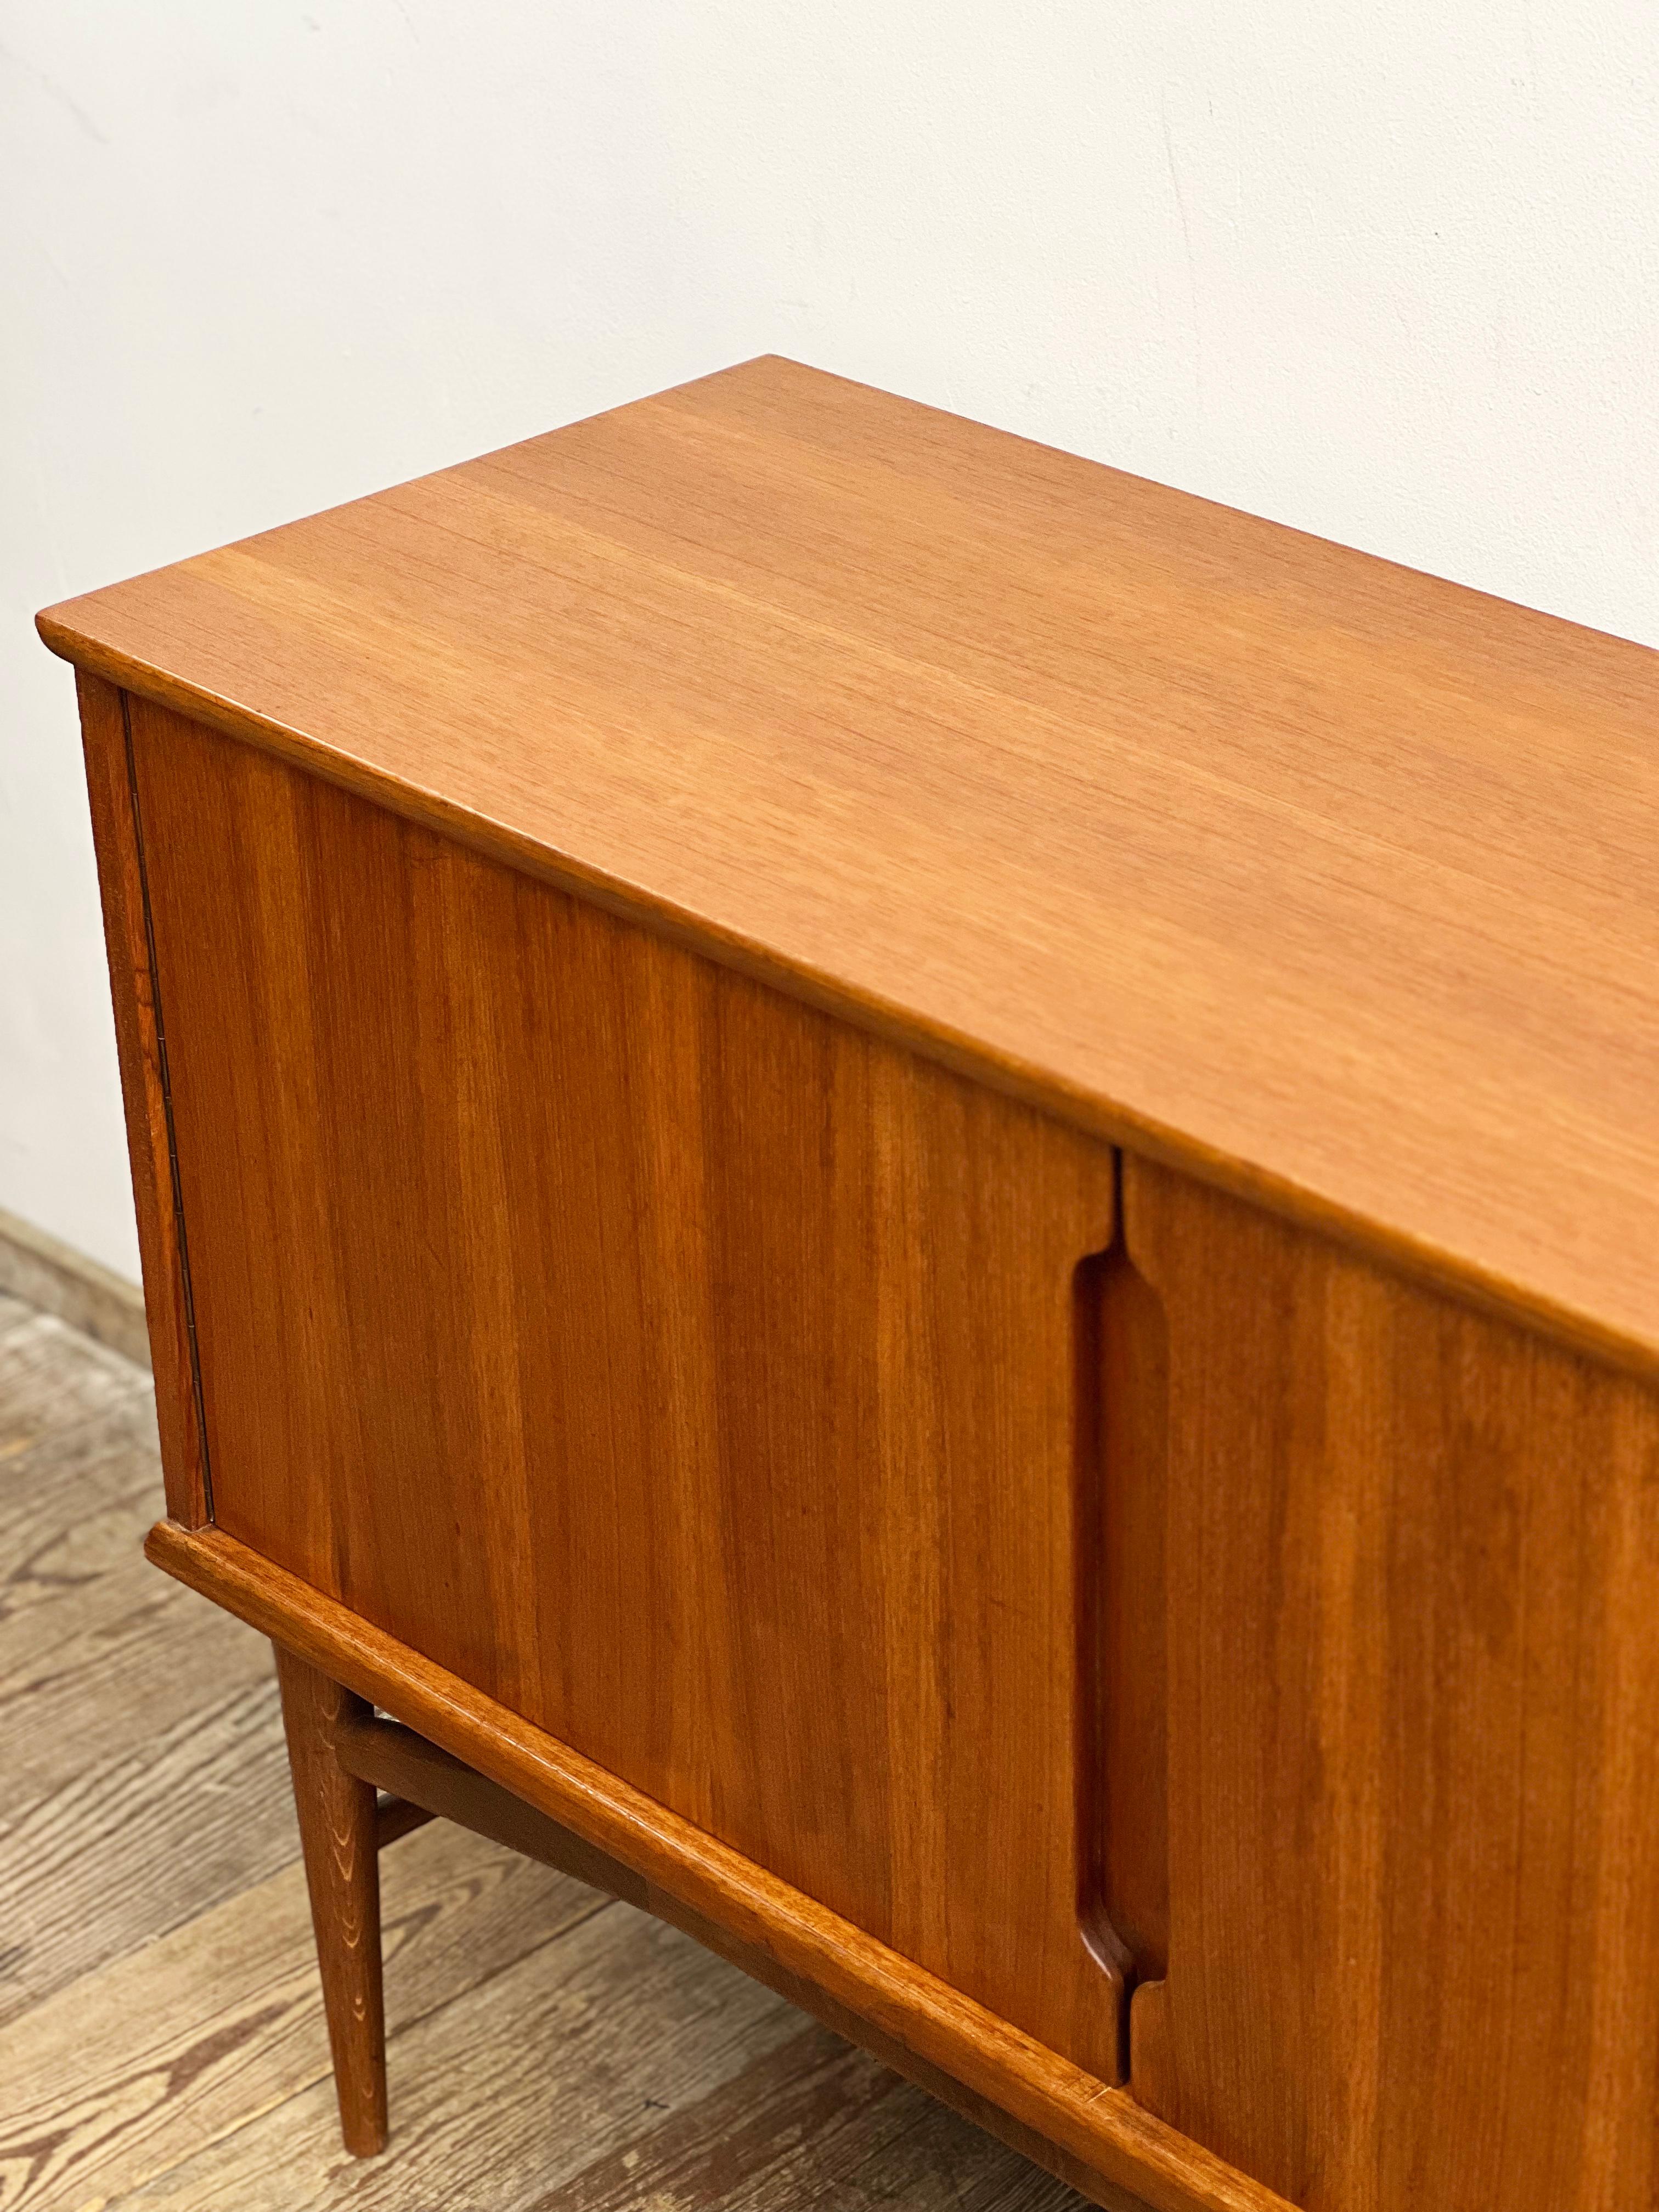 Small Mid-Century Modern Fredericia Sideboard in Teak, Germany, 1950s For Sale 8